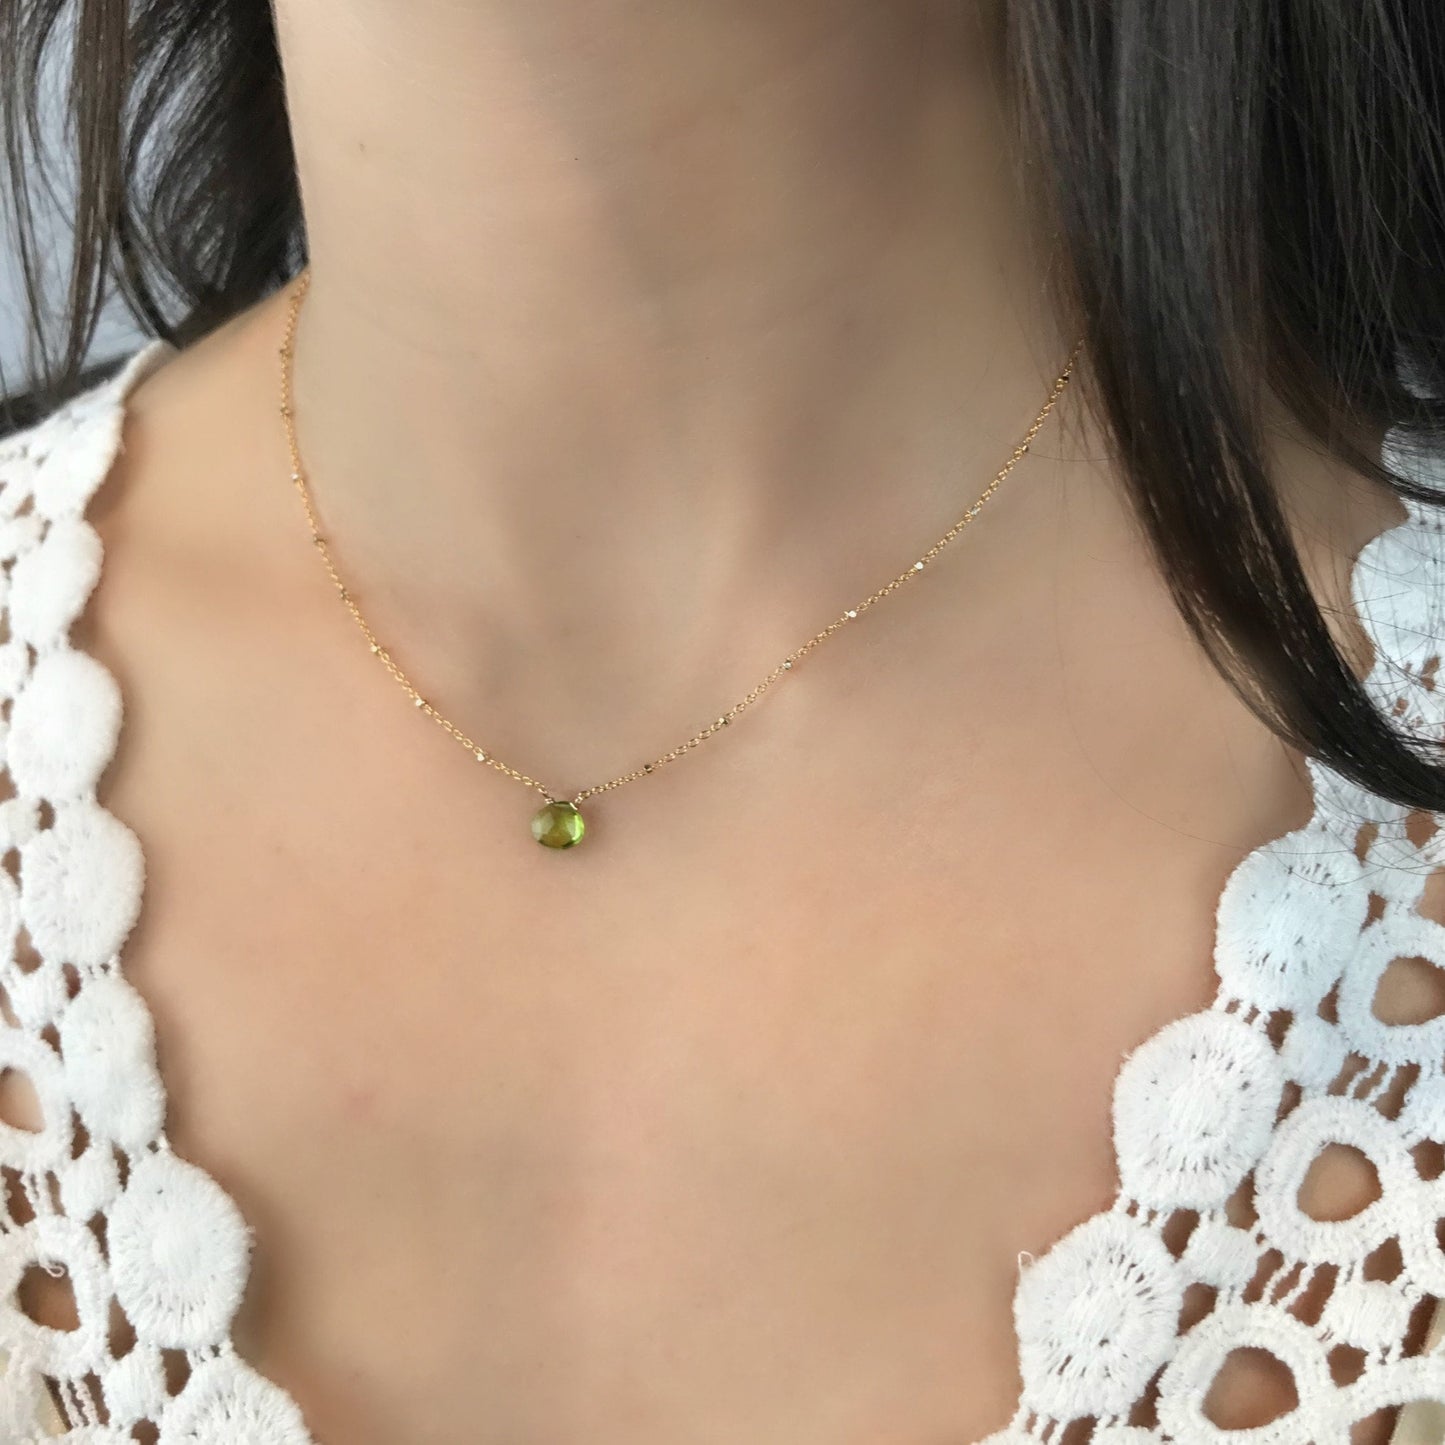 Peridot Necklace Birthstone Necklace Gemstone Necklace Dainty Necklace Layering Necklace Everyday Necklace August Birthstone Gift for Her